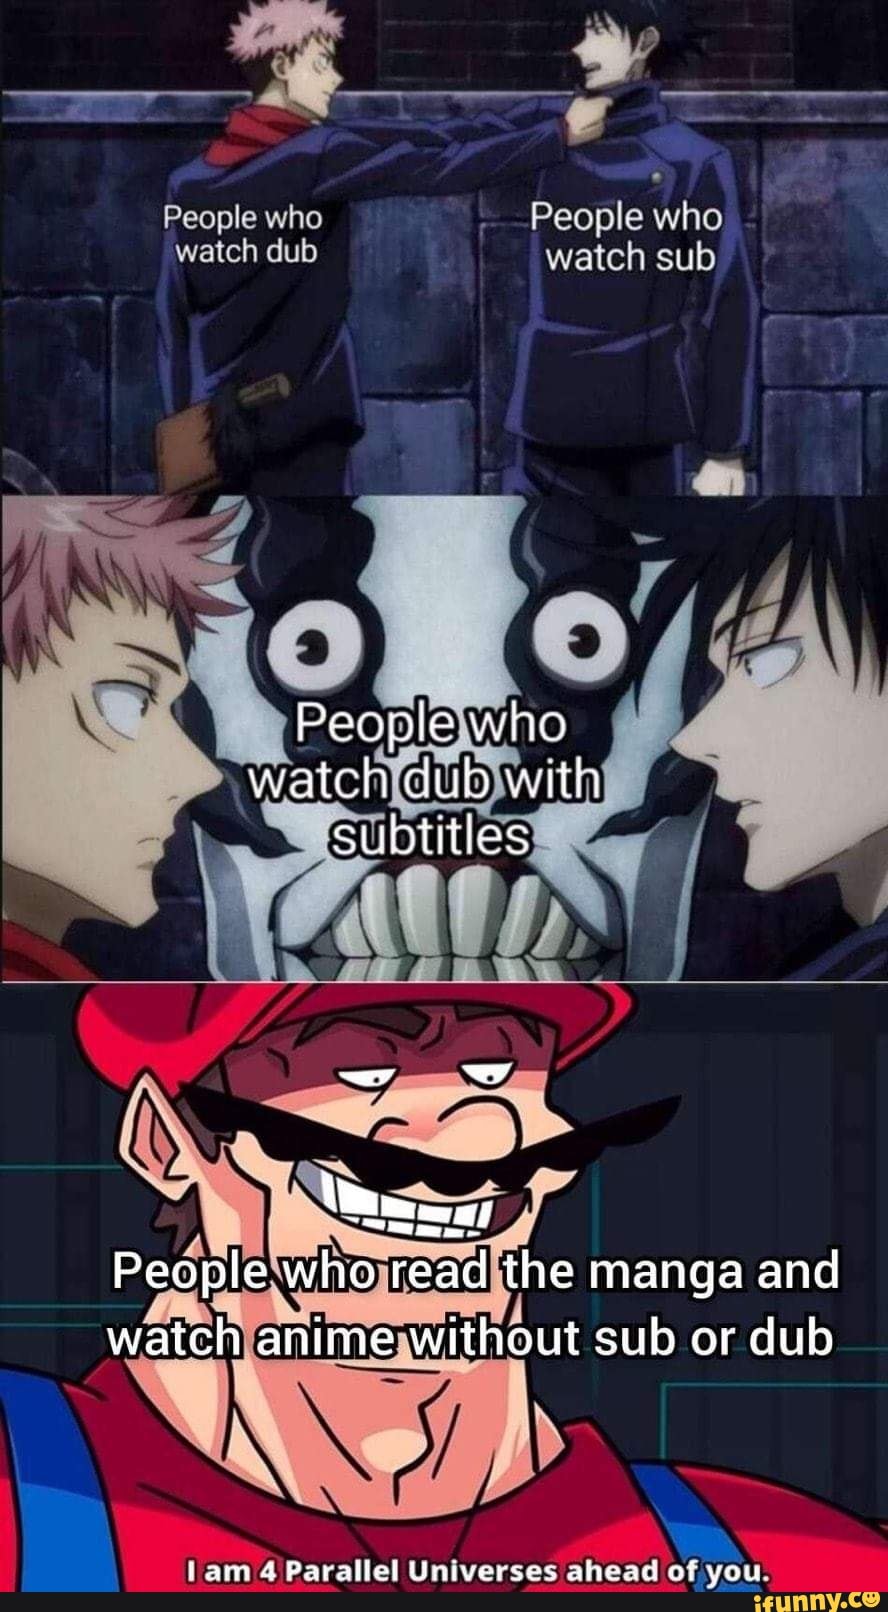 Subs vs. Dubs: 5 reasons anime subs are better than dubs